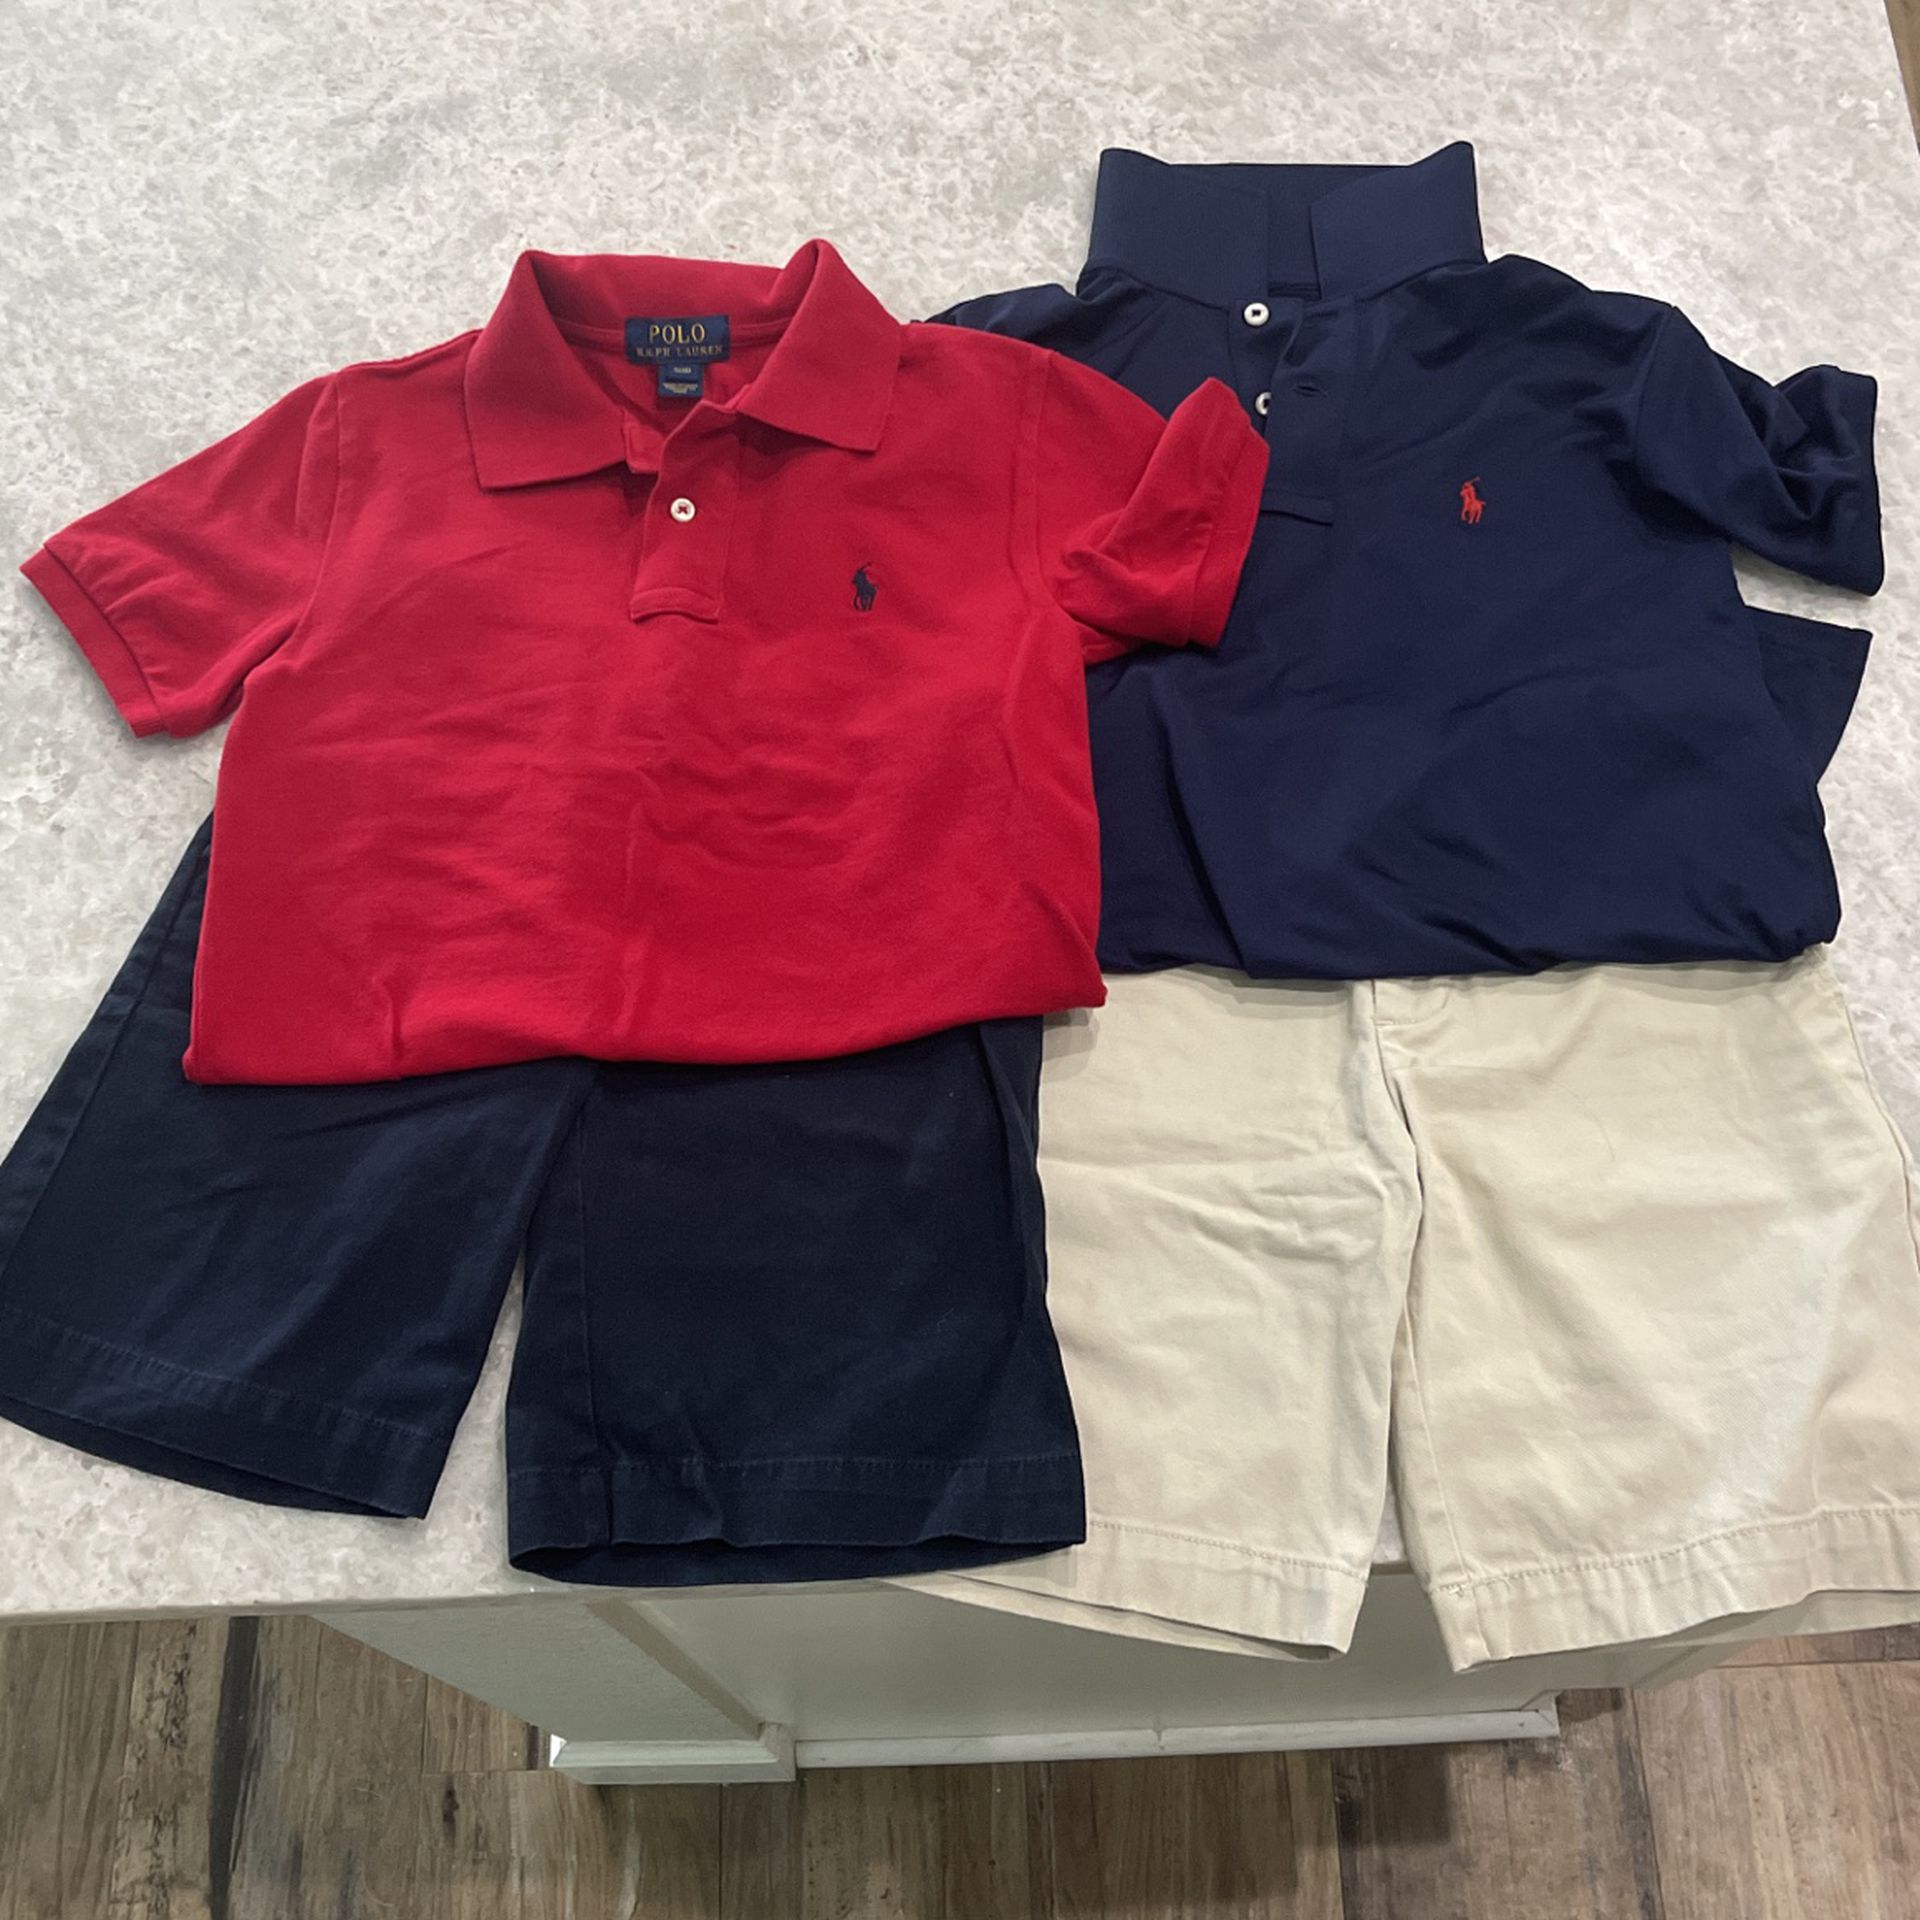 Boys Polo Ralph Lauren Shirts And Shorts Youth Small